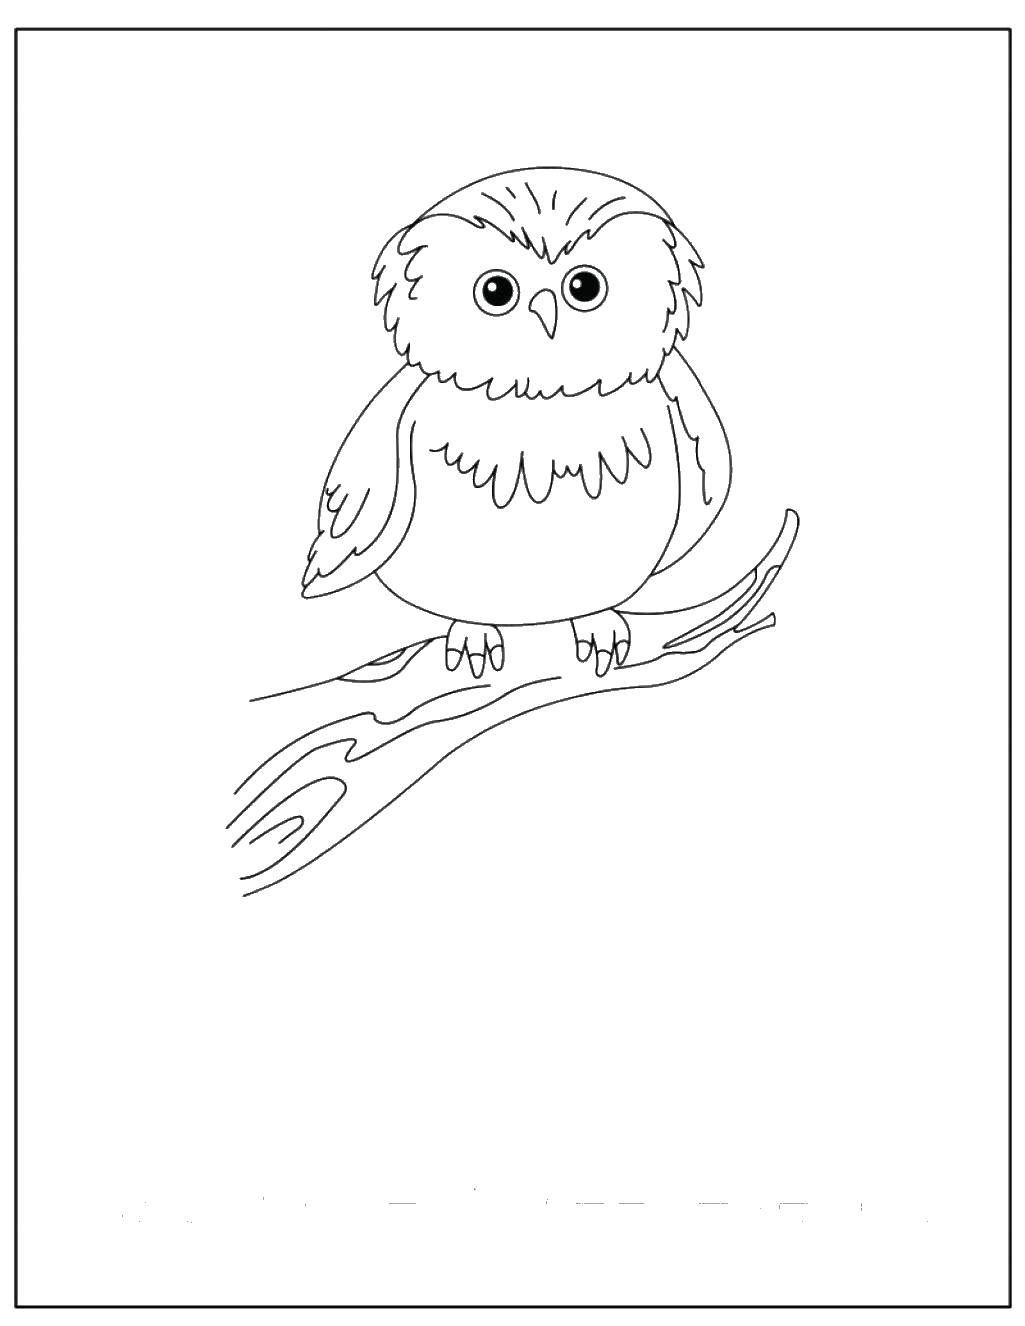 Coloring Owl on the branch. Category Nature. Tags:  nature, branch, owl.